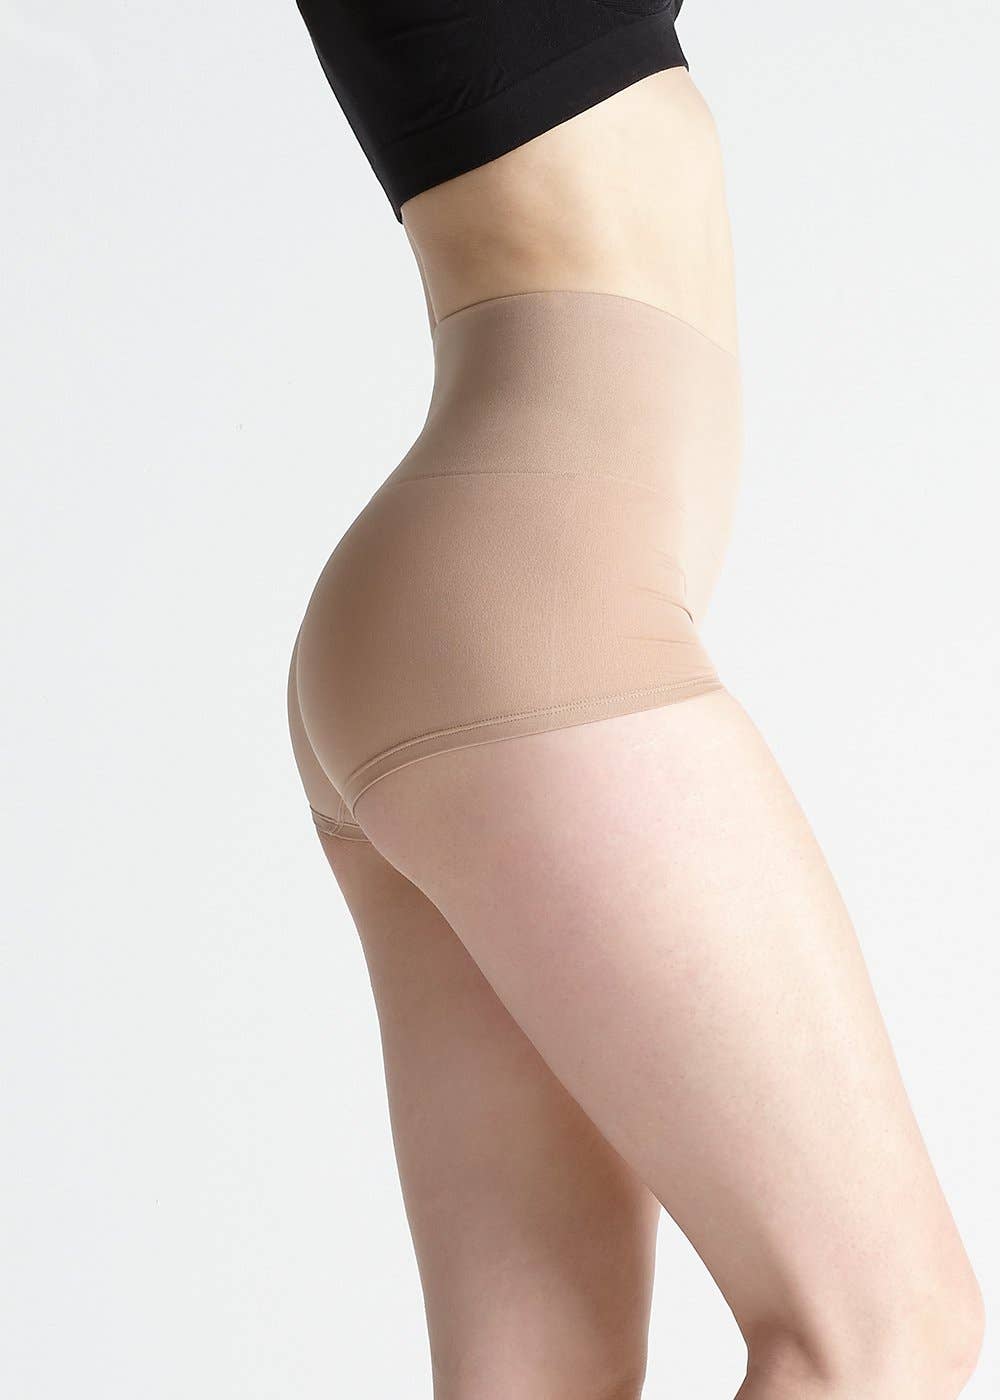 Yummie - Ultralight Shaping Girlshort - Seamless - Comes in 2 Colors!